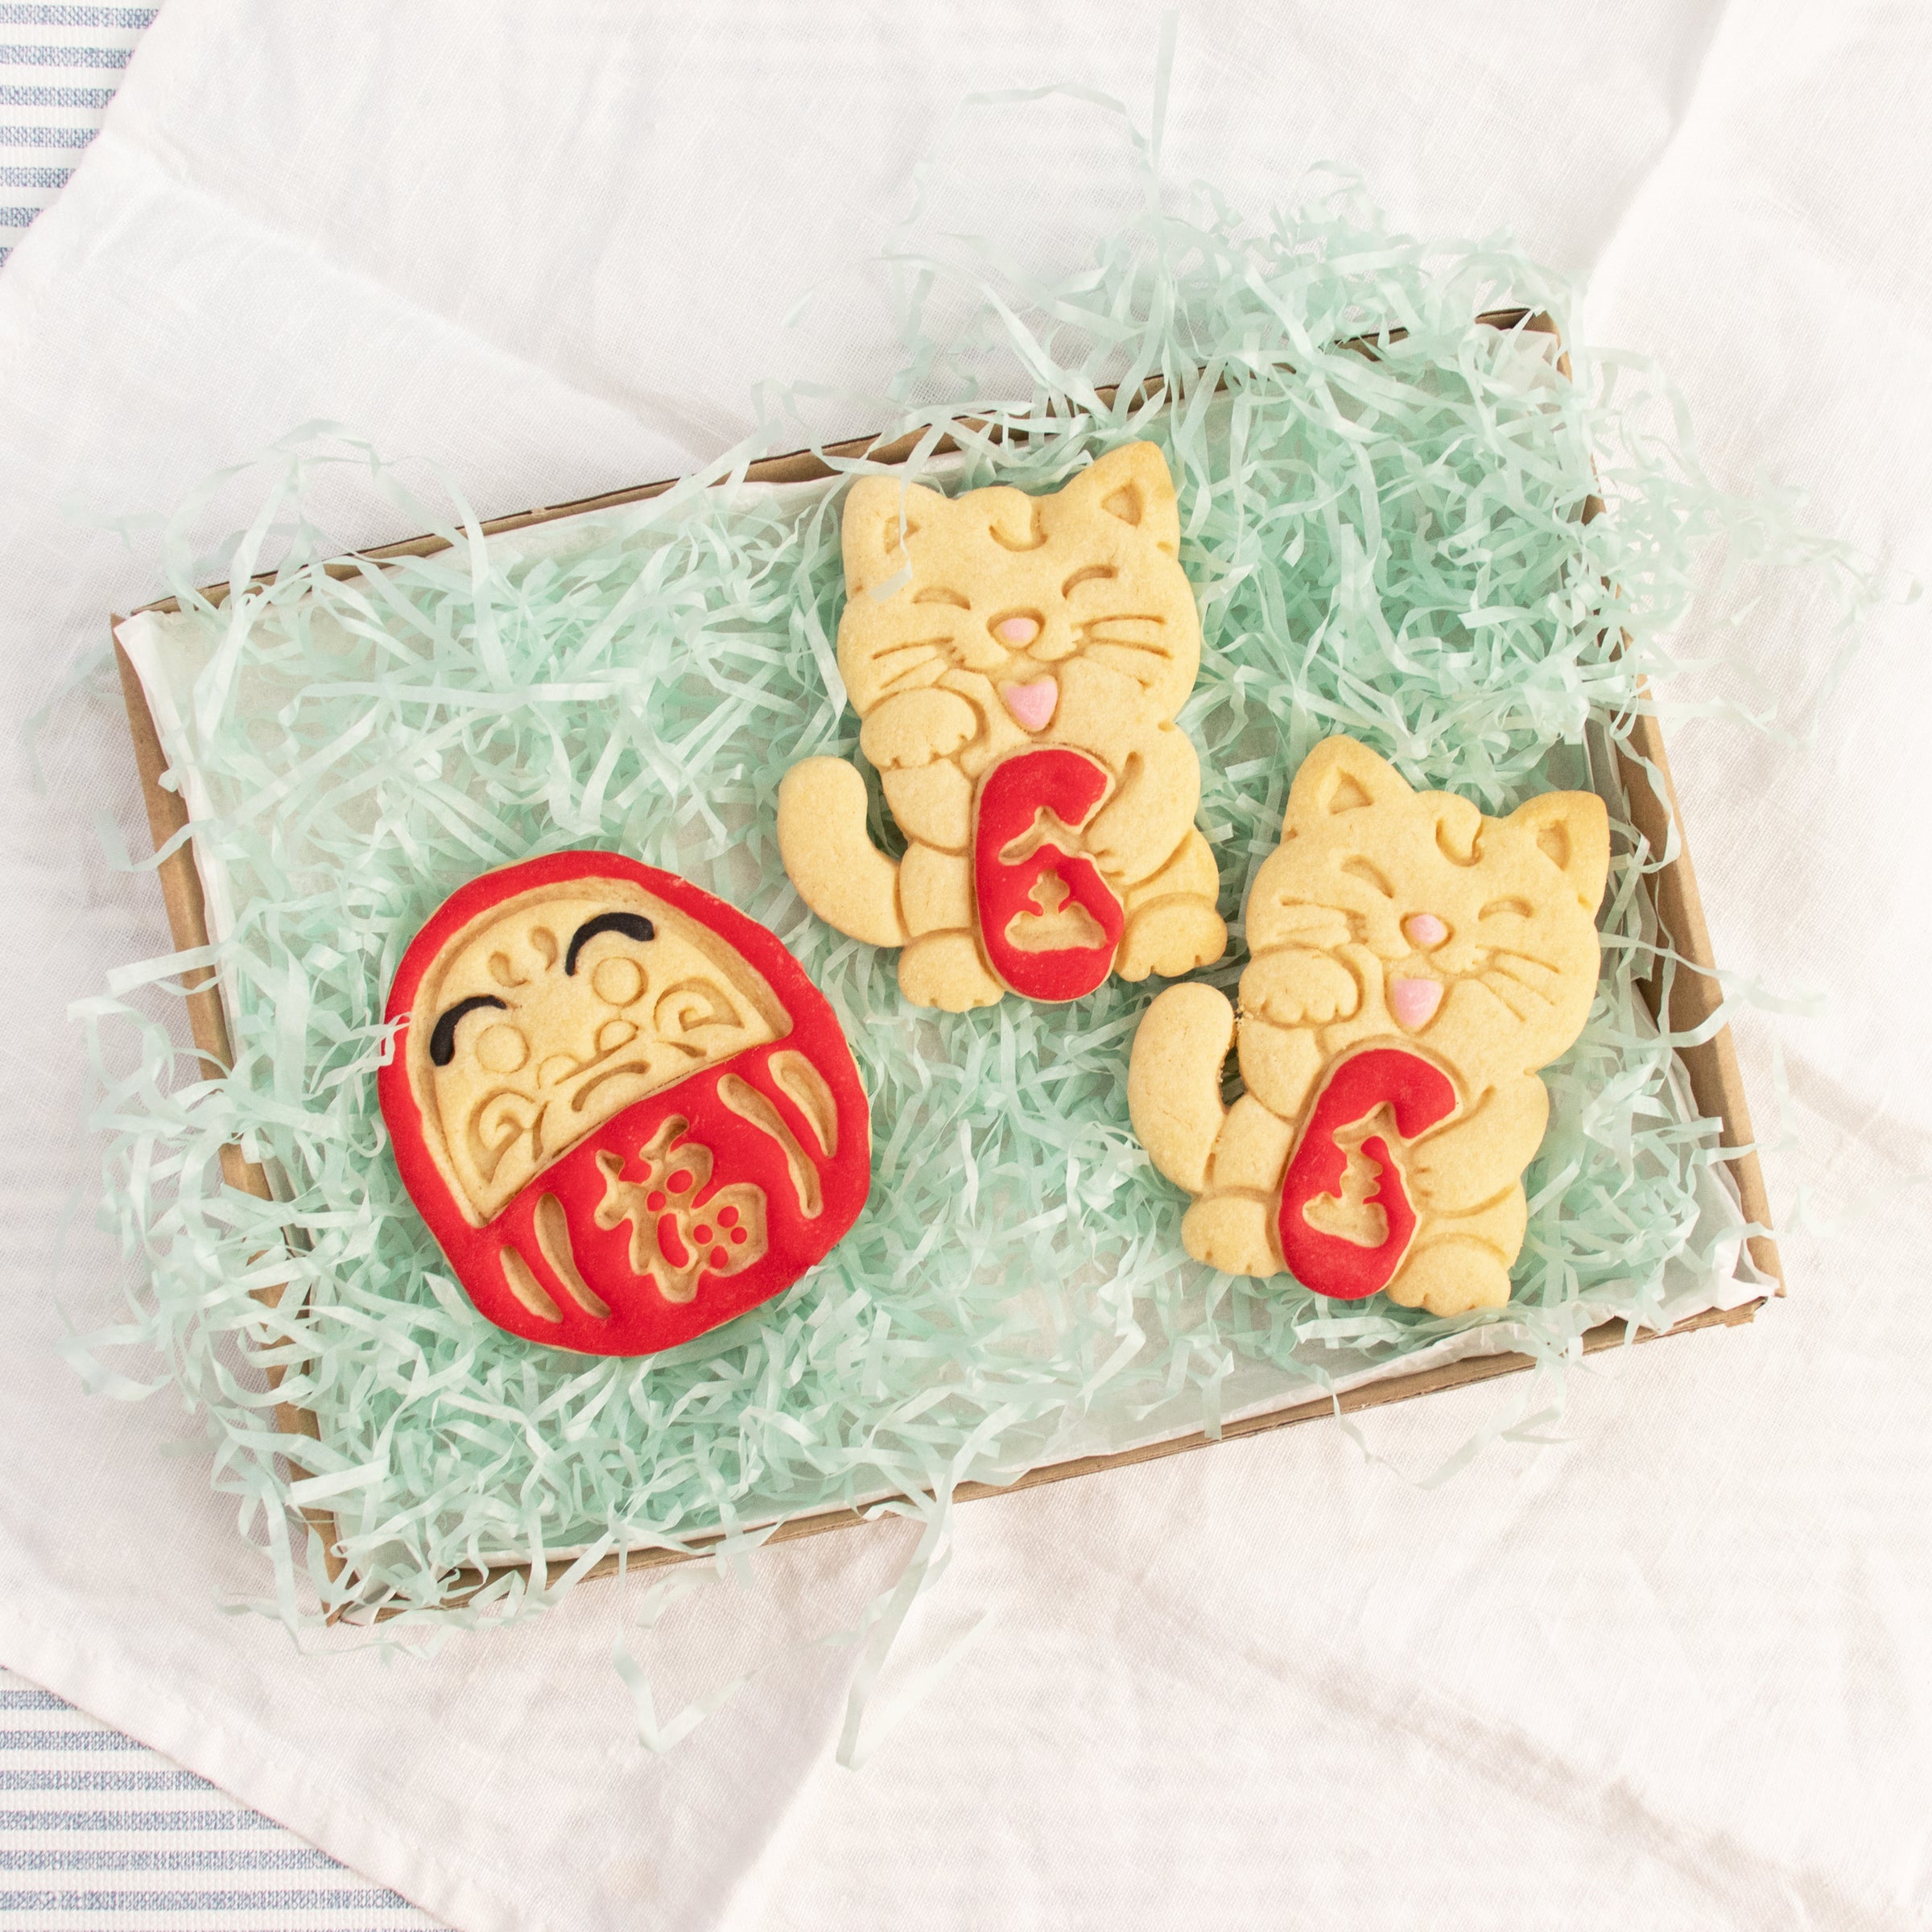 lucky cat and daruma doll cookies